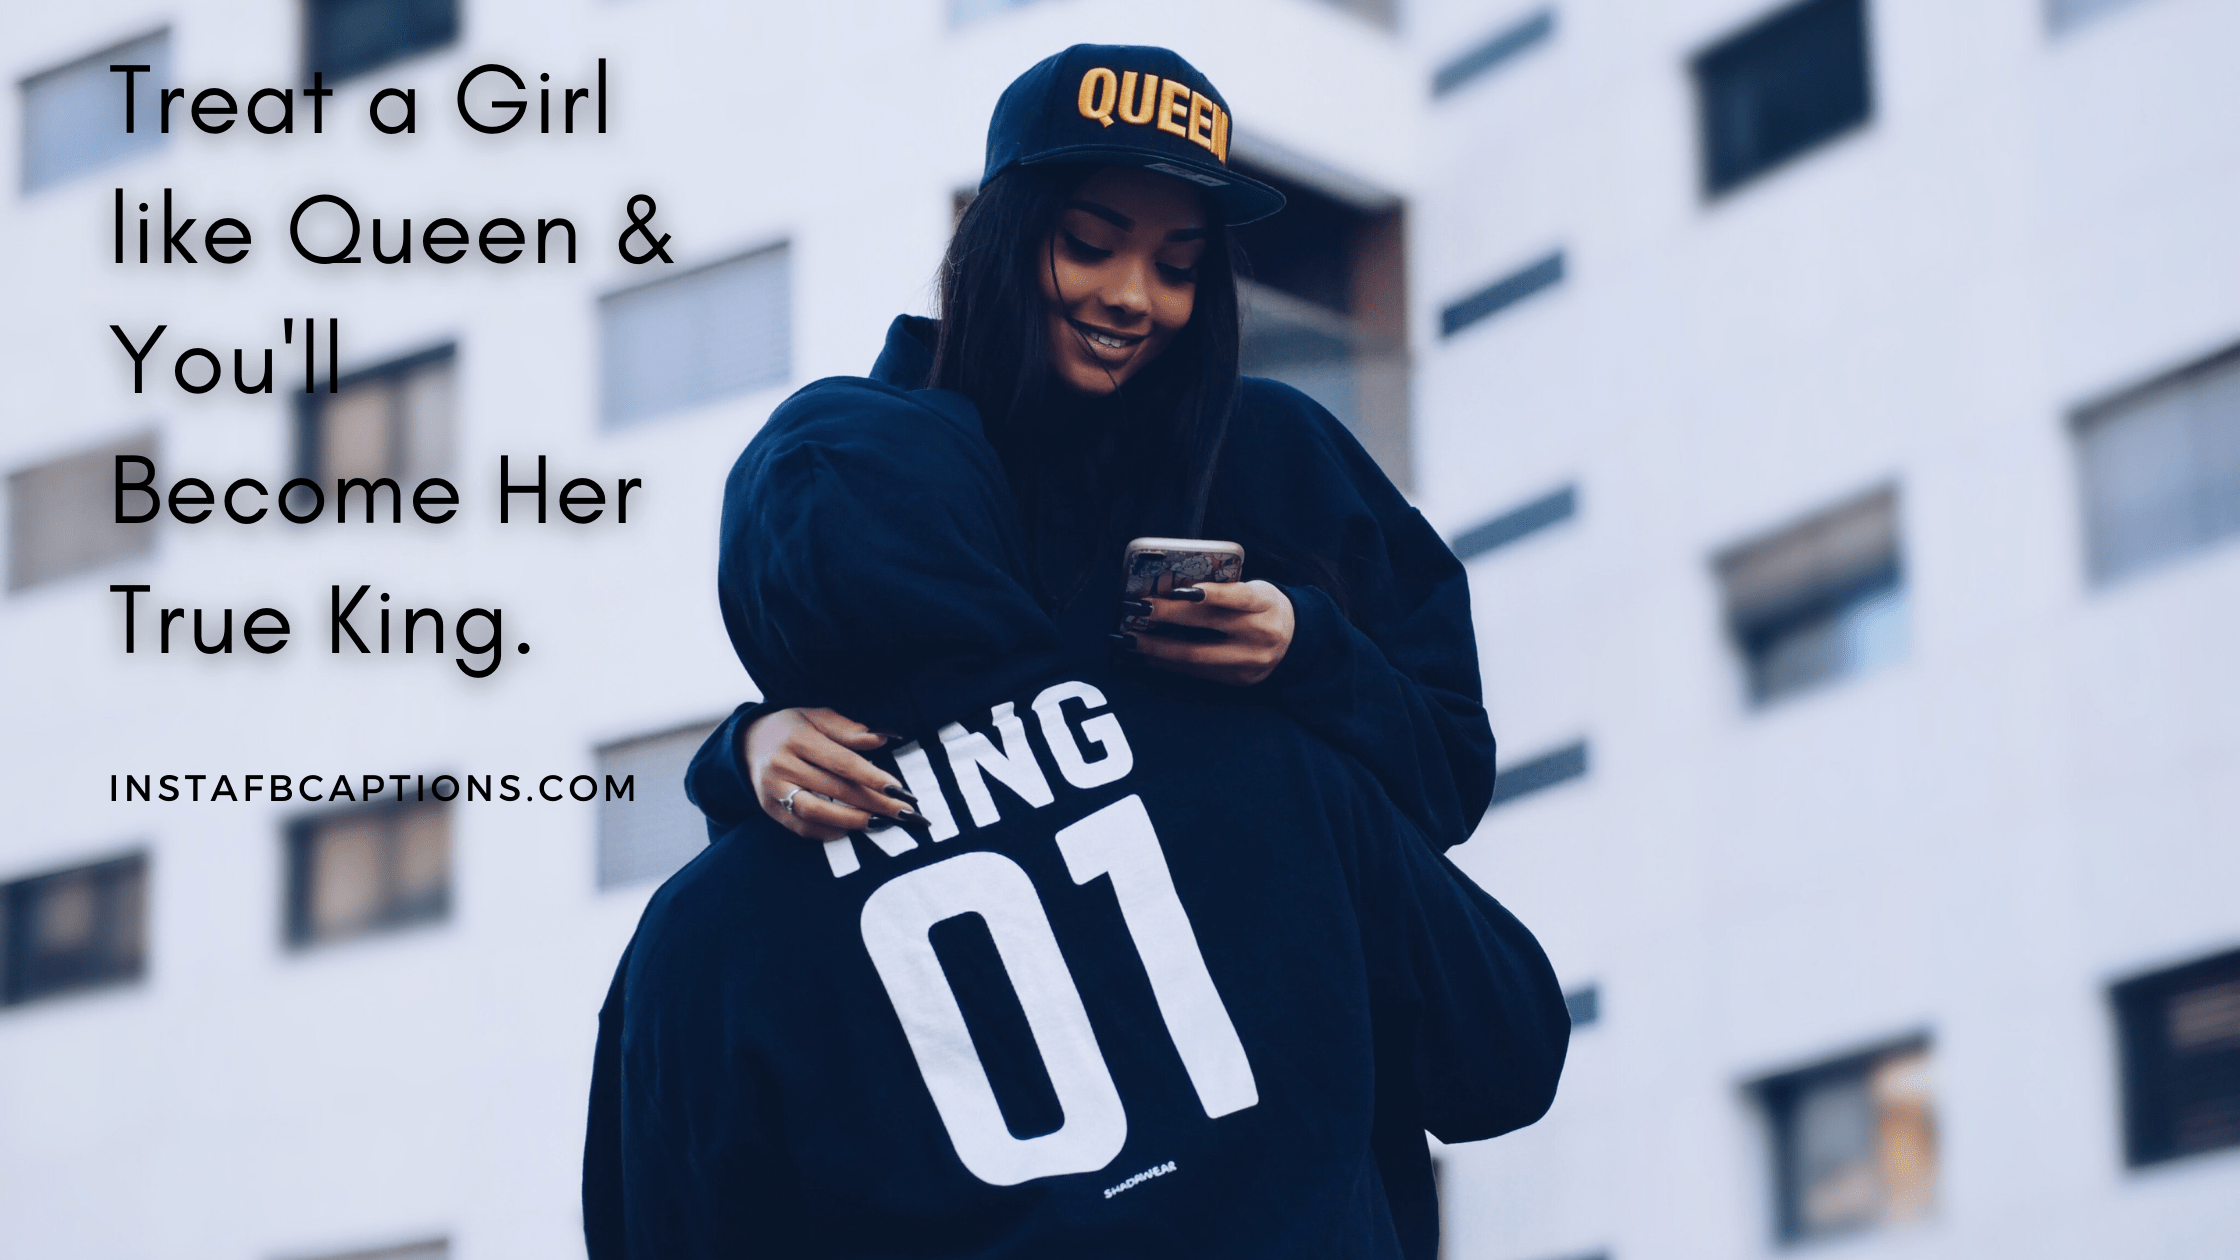 Treat a Girl like Queen & You'll Become Her True King king captions for instagram - Best King And Queen Couple Captions - 95+ King Captions For Instagram Posts in 2022